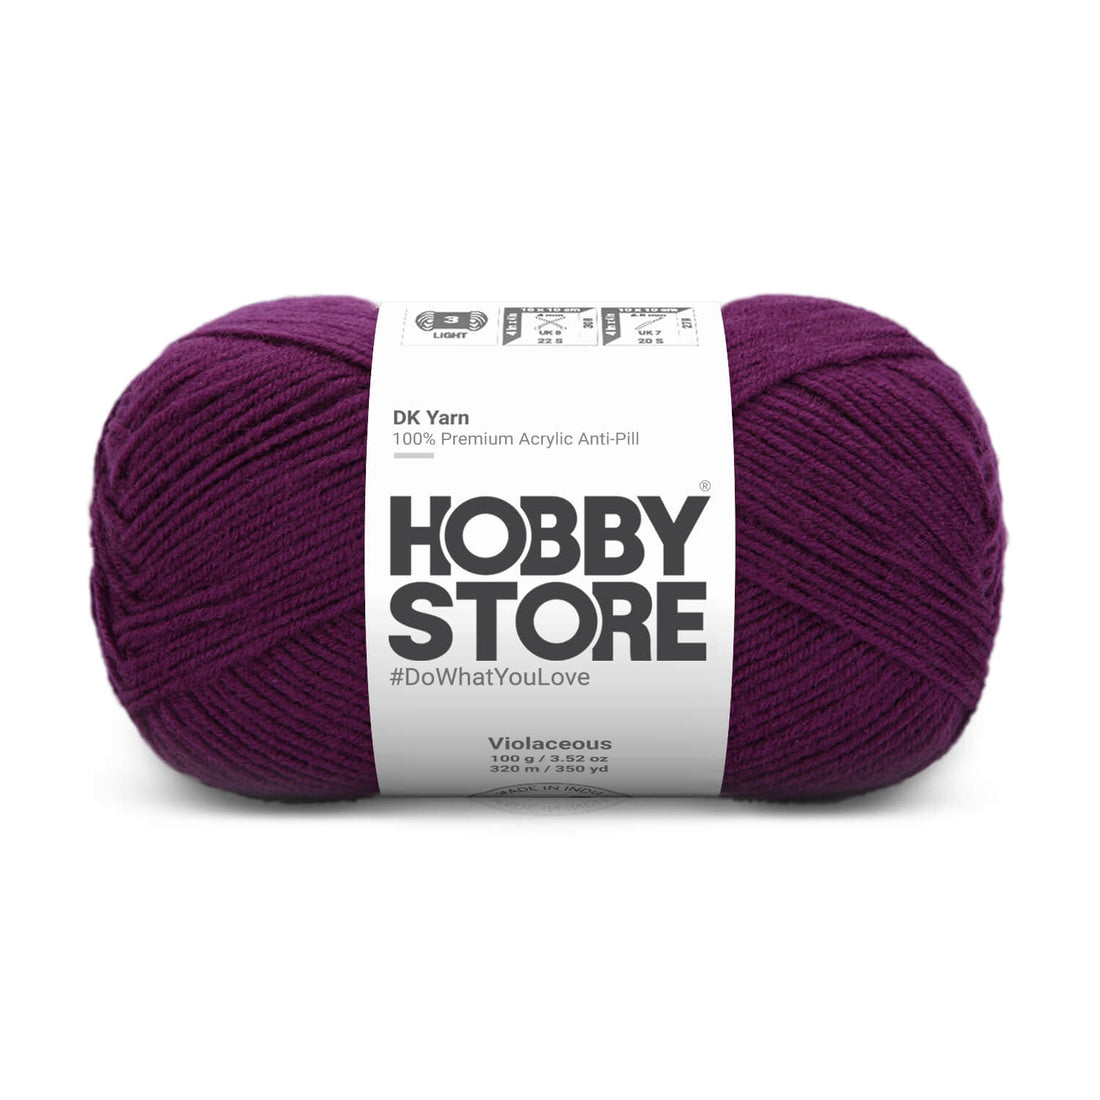 DK Anti-Pill Yarn by Hobby Store - Violaceous 5037